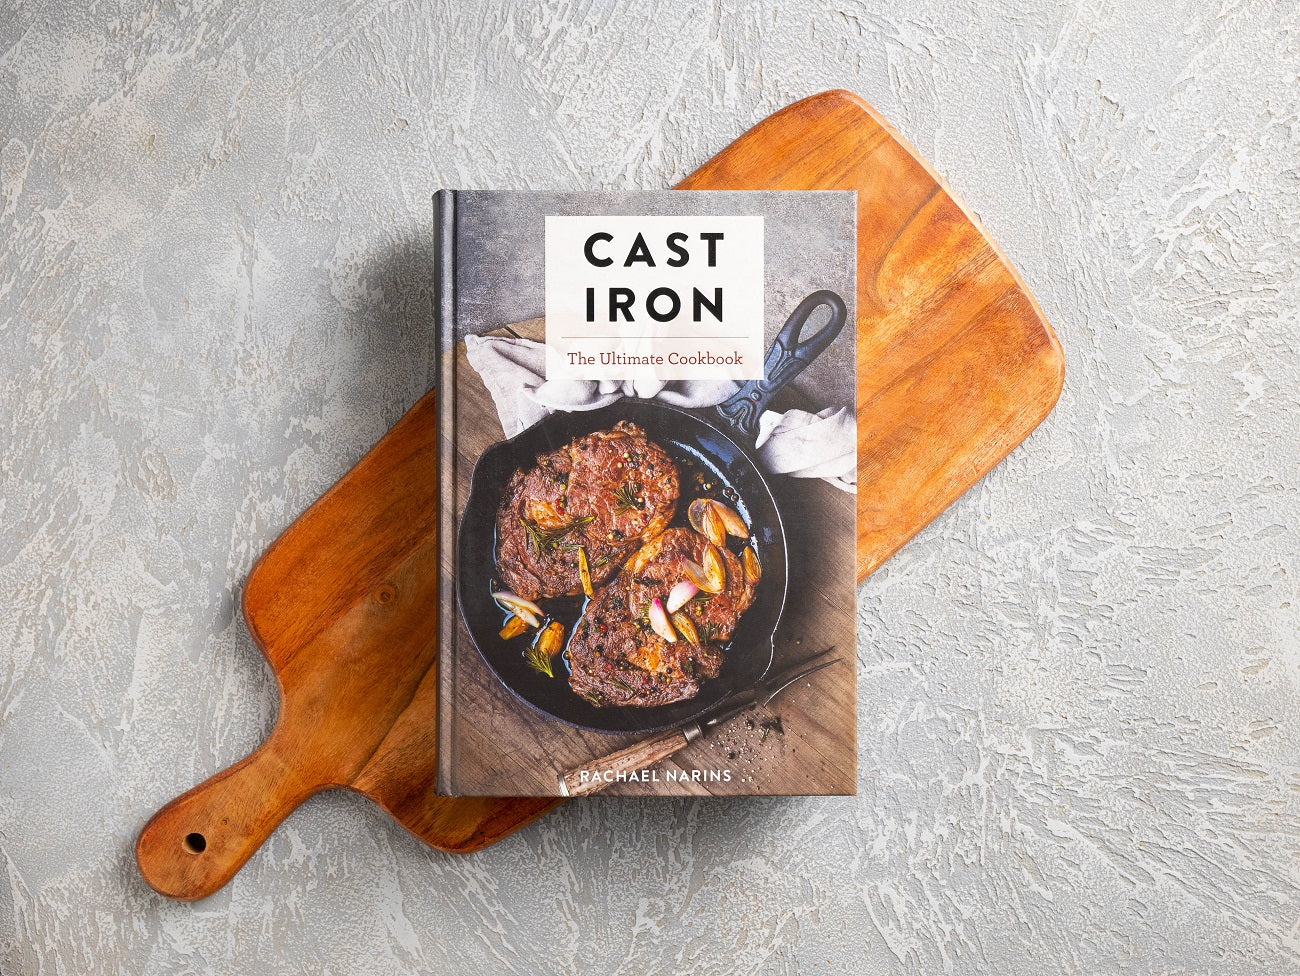 The Campfire Cast Iron Cookbook: The Ultimate Cookbook of Hearty and Delicious Cast Iron Recipes [Book]